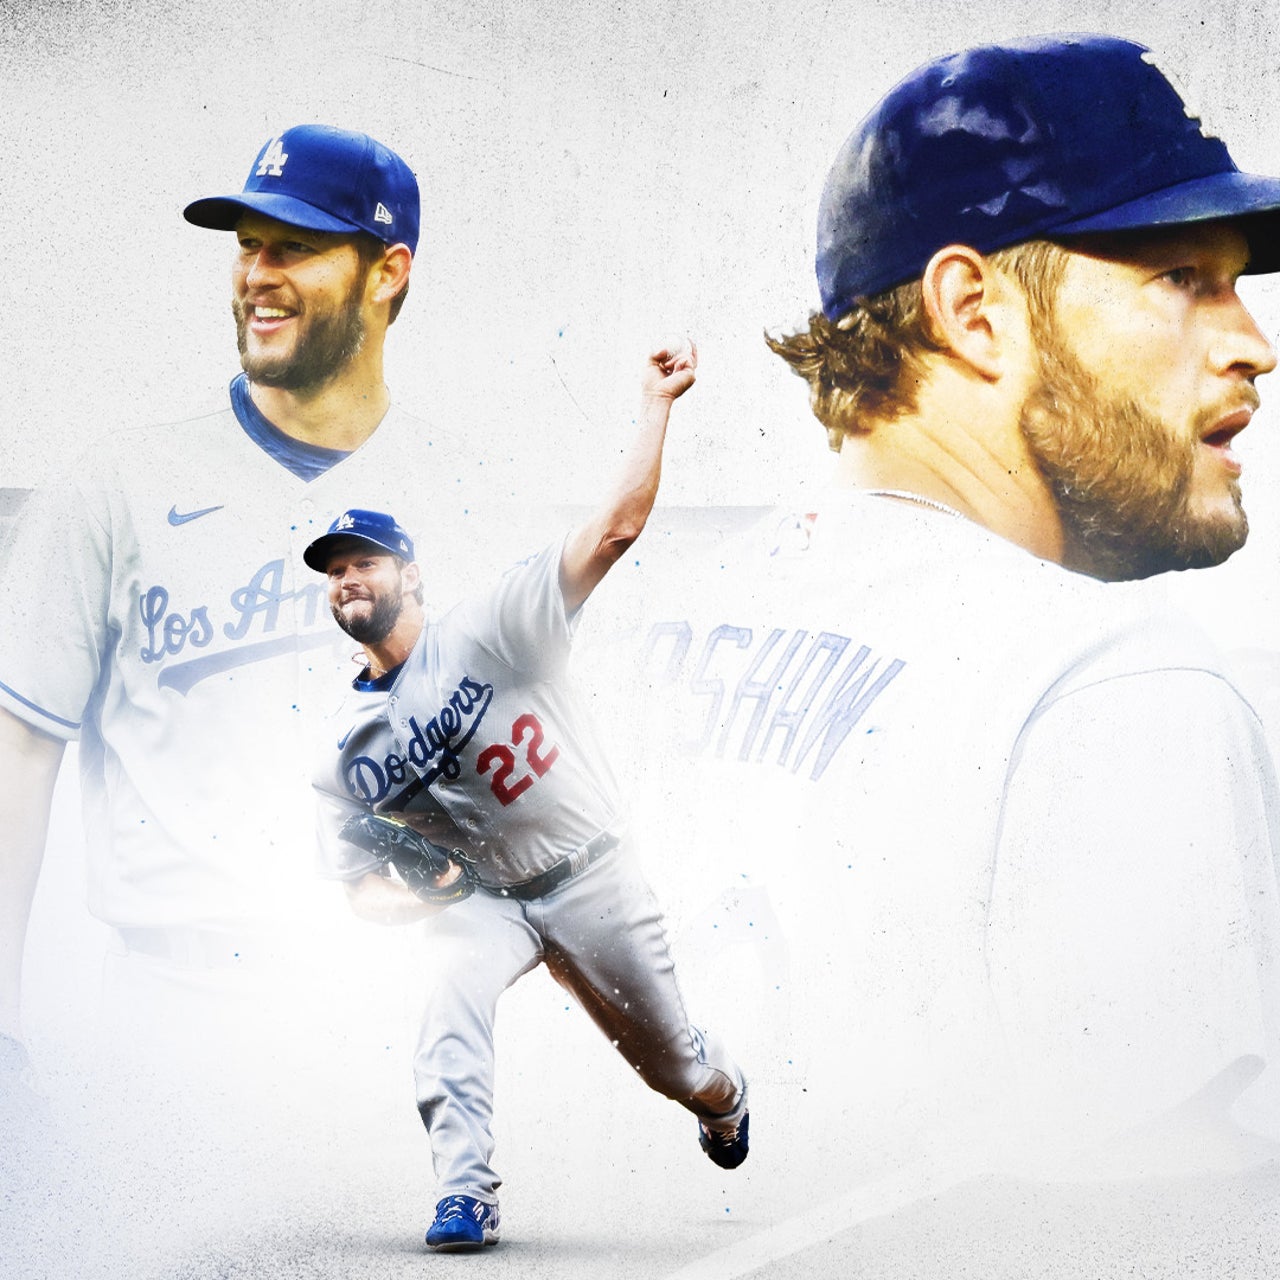 MLB All-Star Game 2022: Clayton Kershaw says first All-Star start